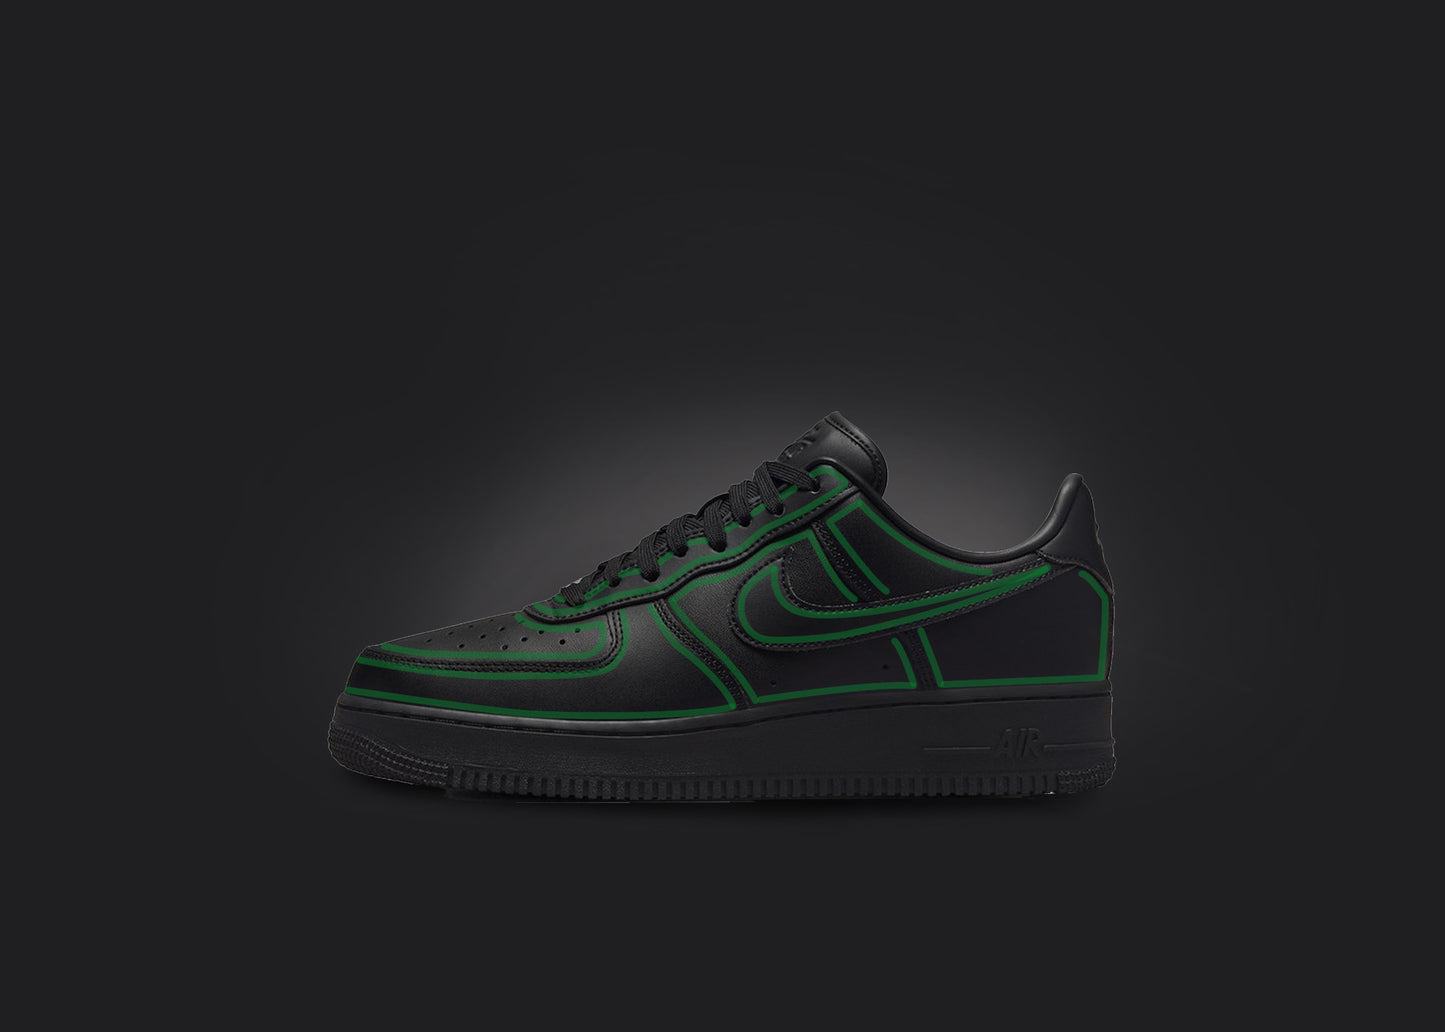 The image is featuring a custom black Air force 1 sneaker on a blank black background. The black nike sneaker has a green cartoon outline design all over the sneaker. 